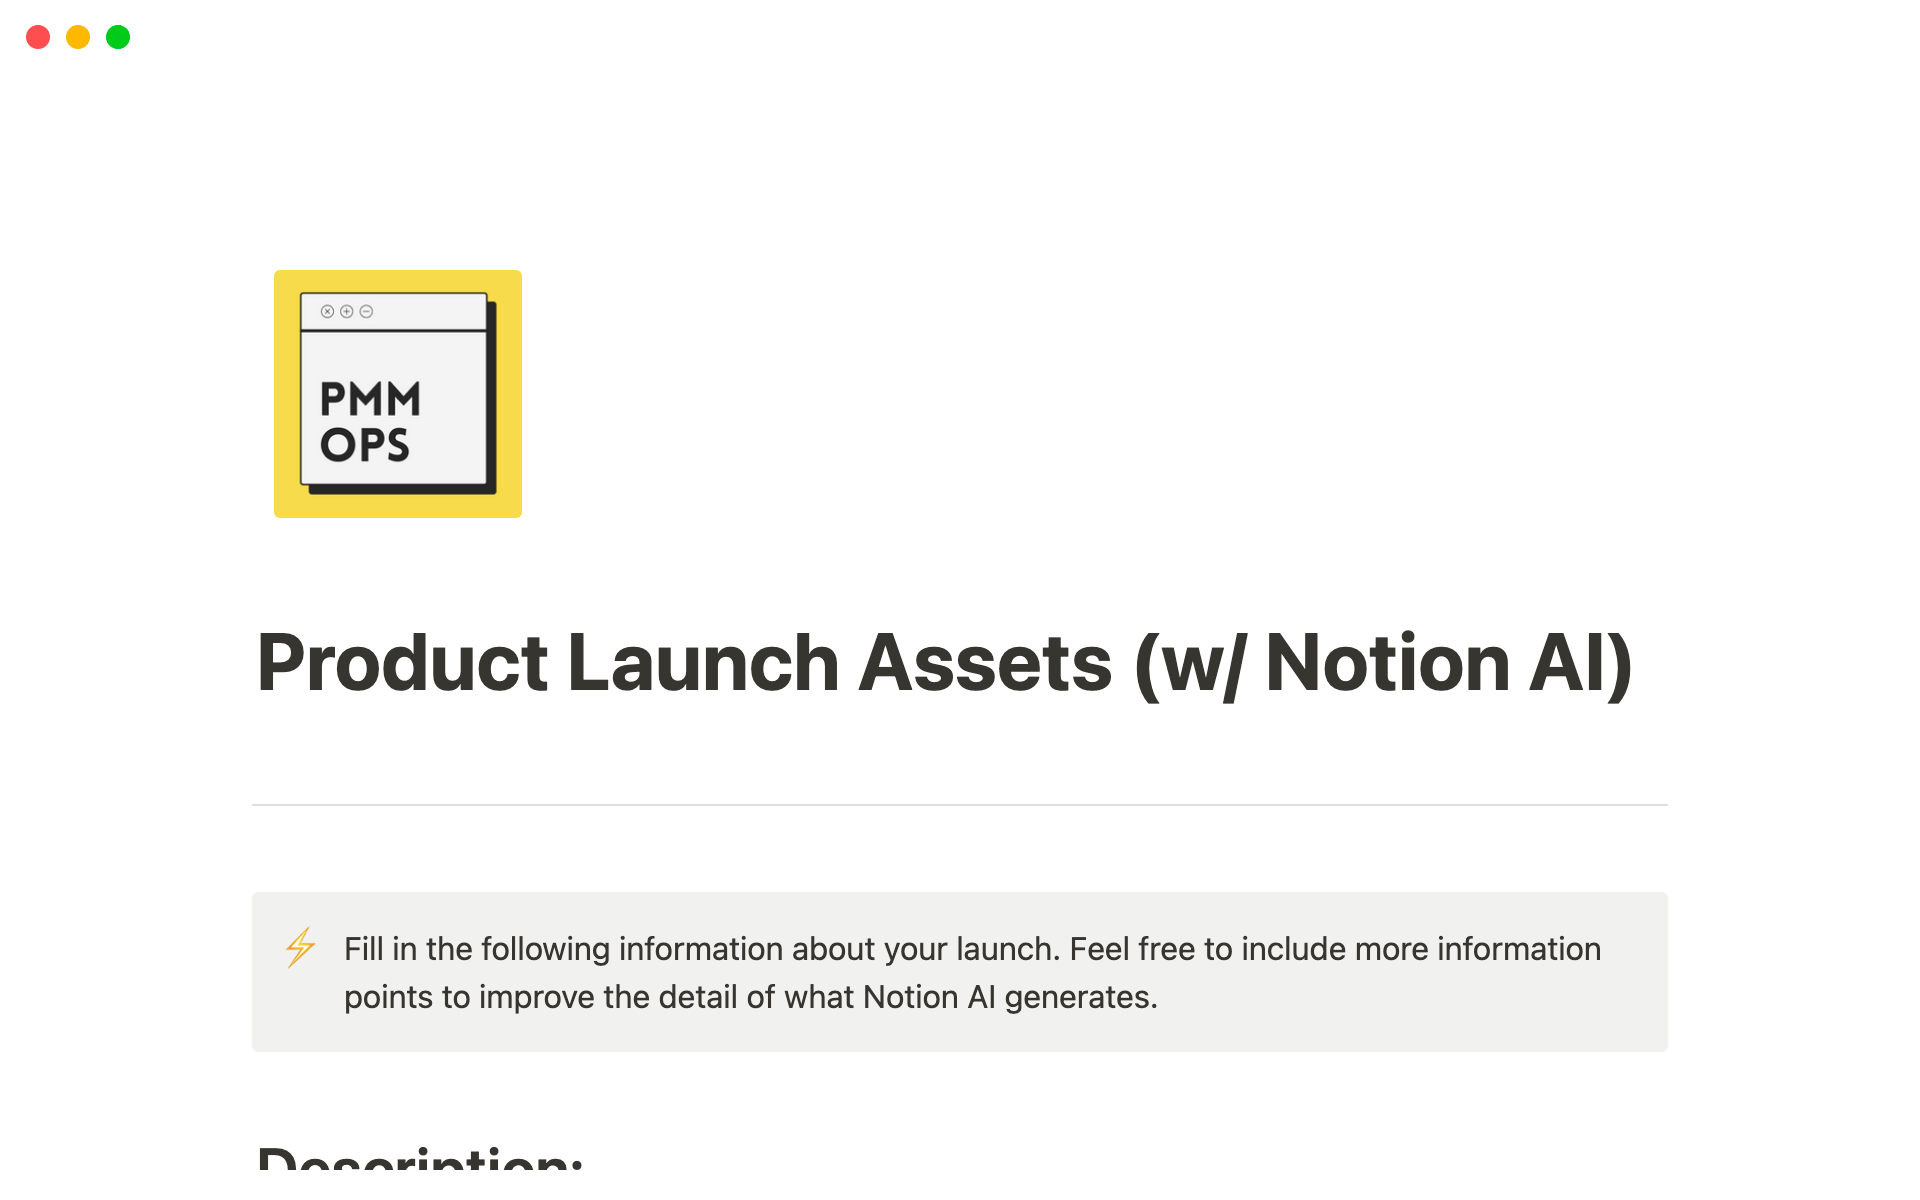 Helps Product Marketers launch quicker by generating launch assets with AI.